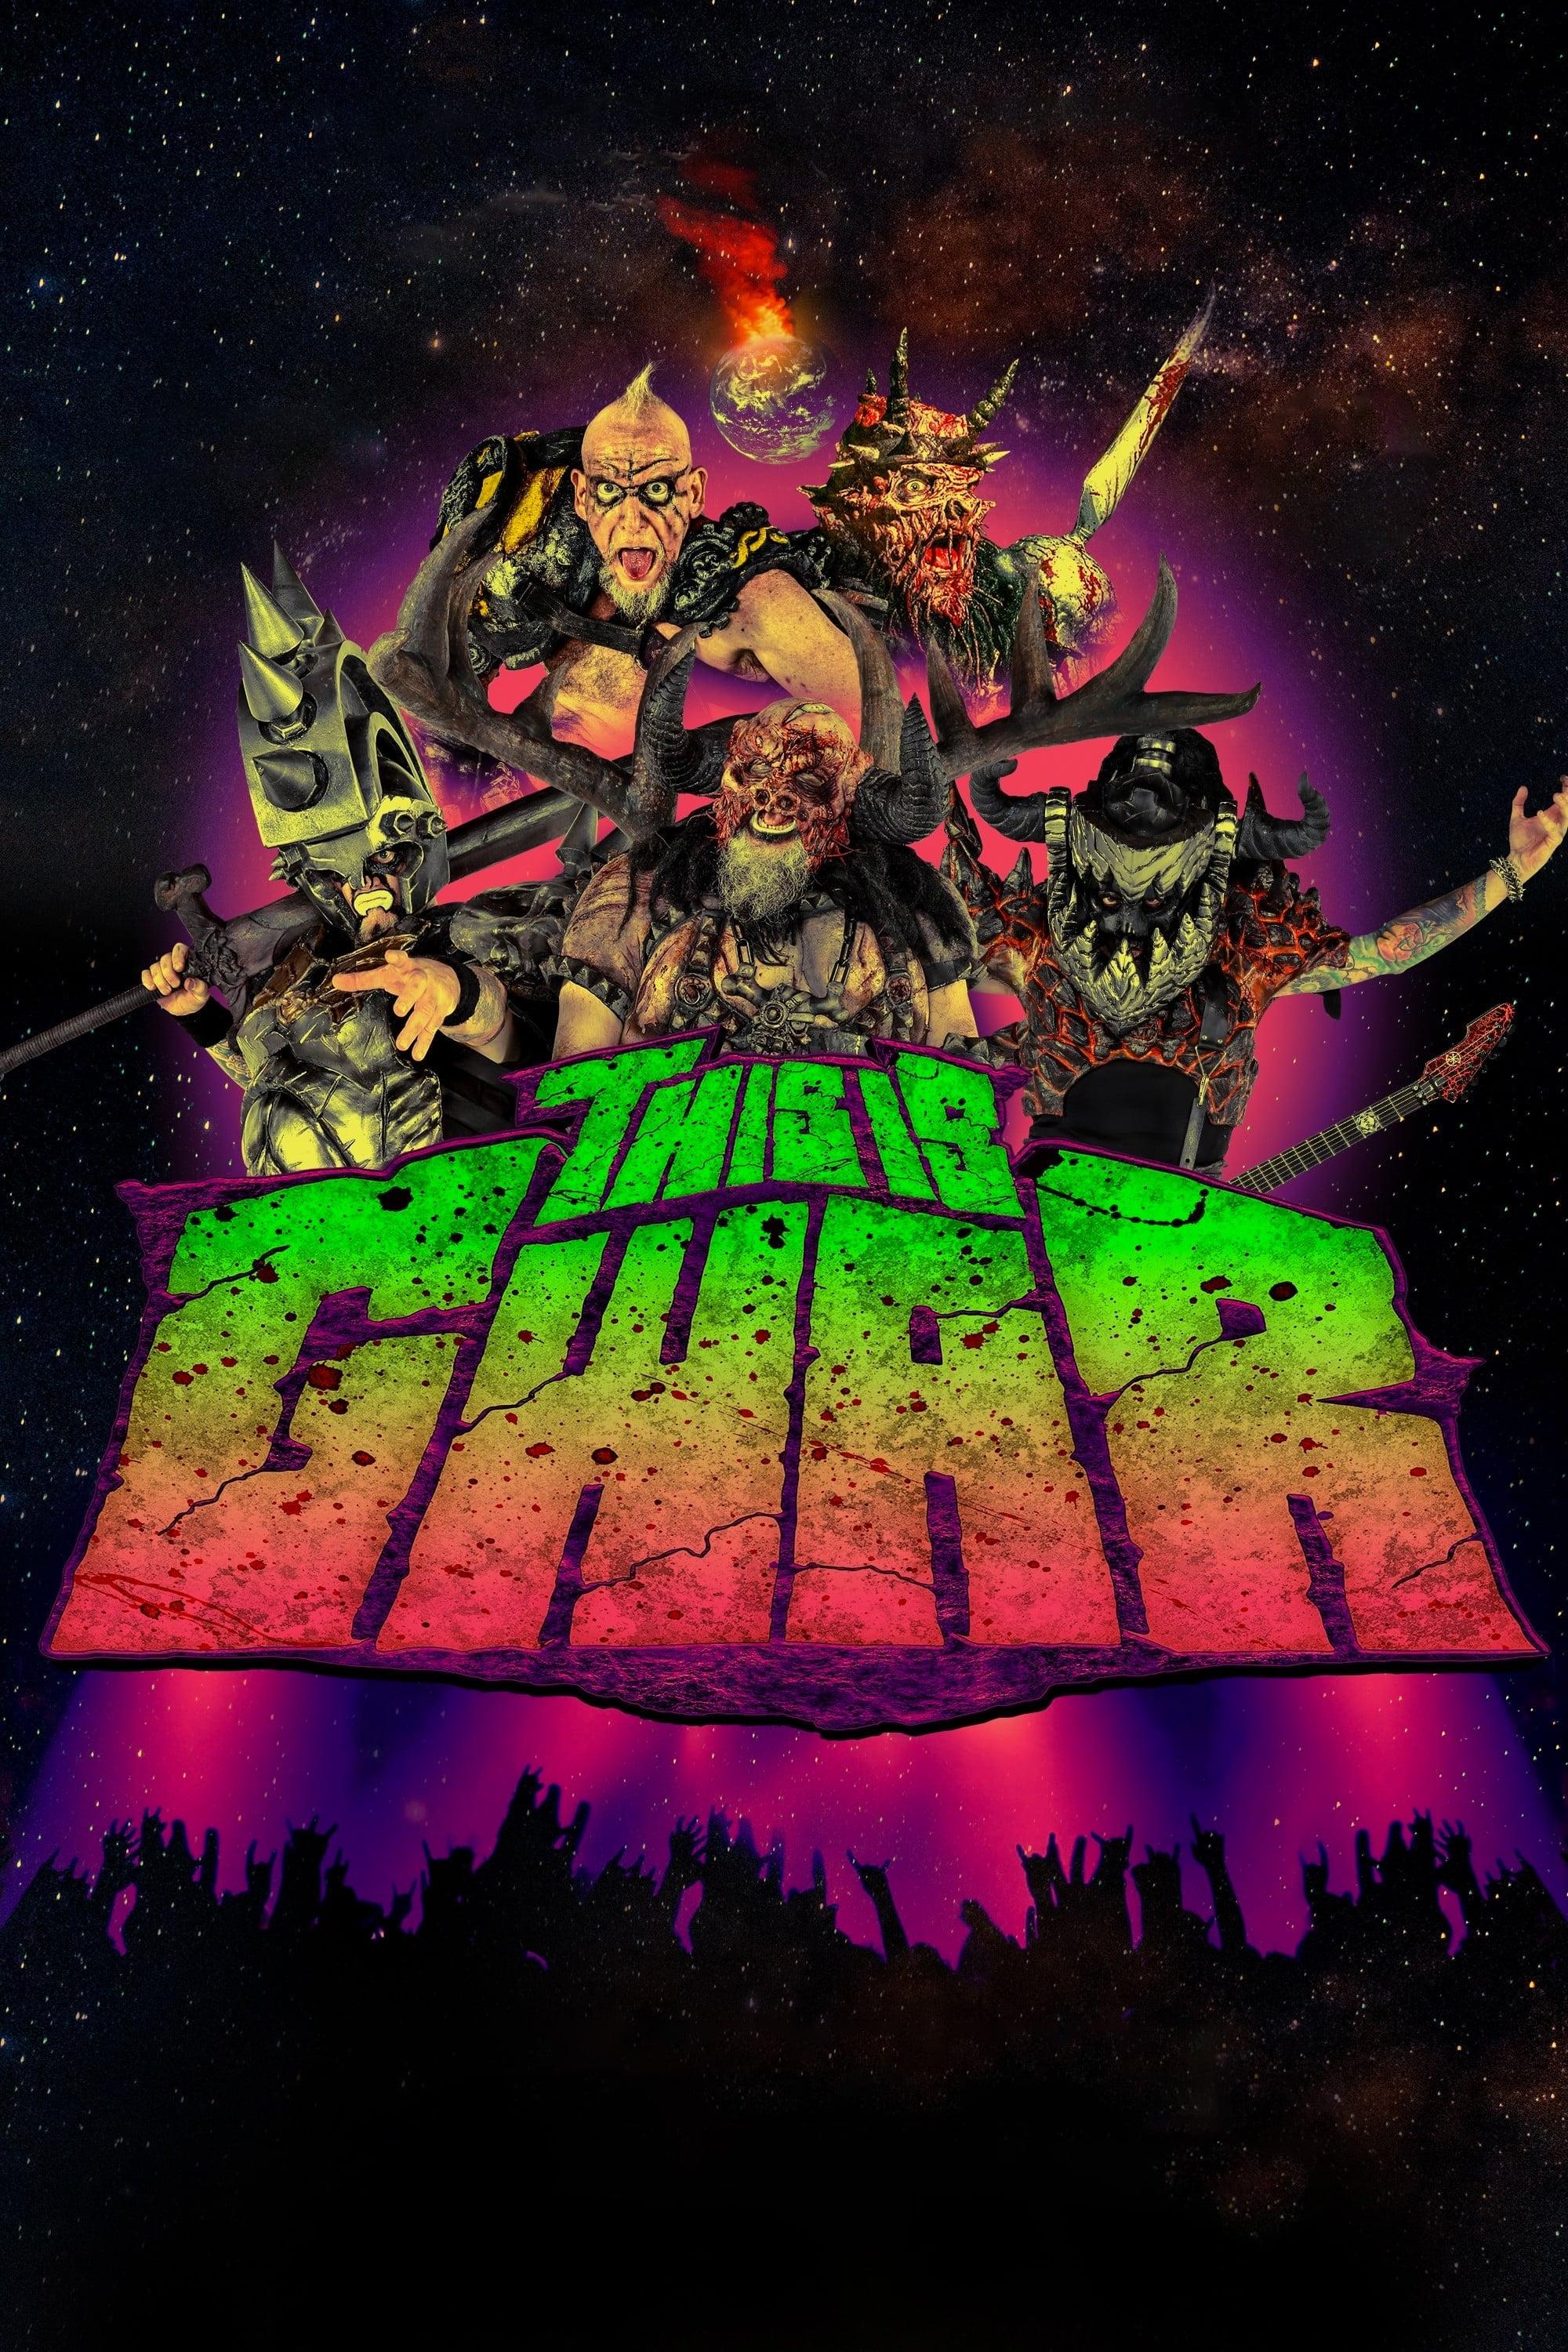 This Is GWAR poster